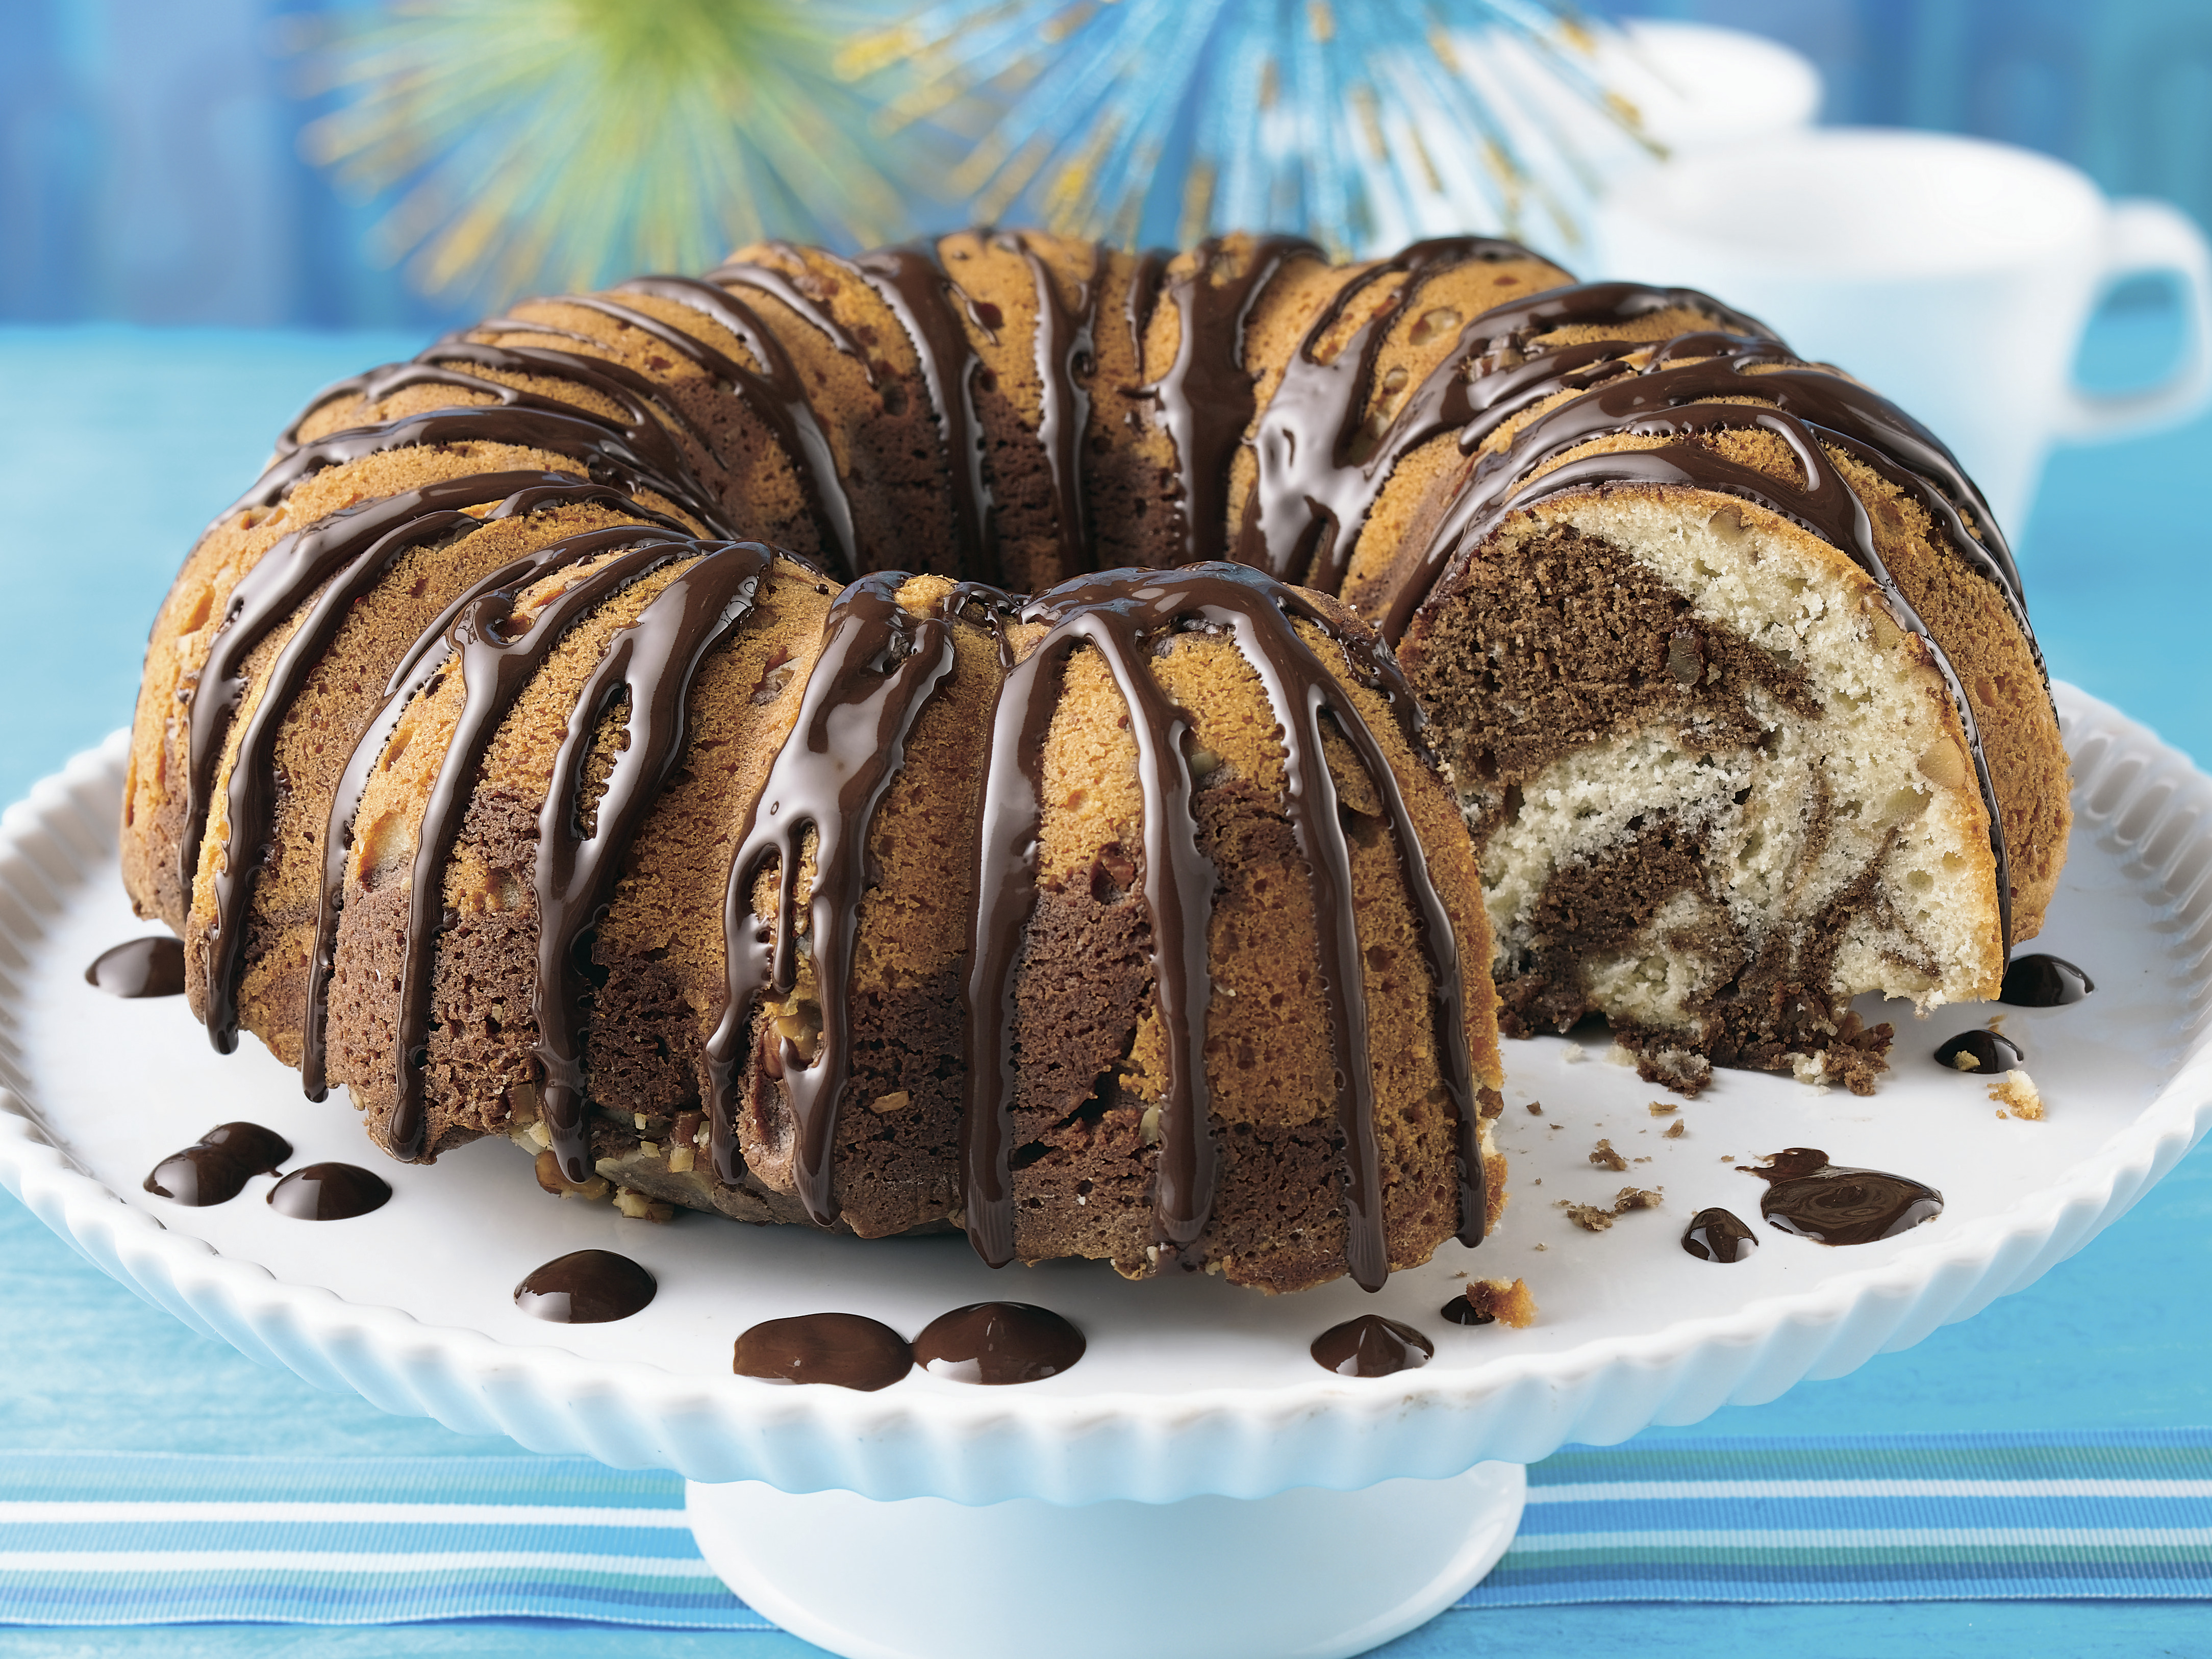 Marble Cake with Chocolate Frosting Recipe - Grace Parisi